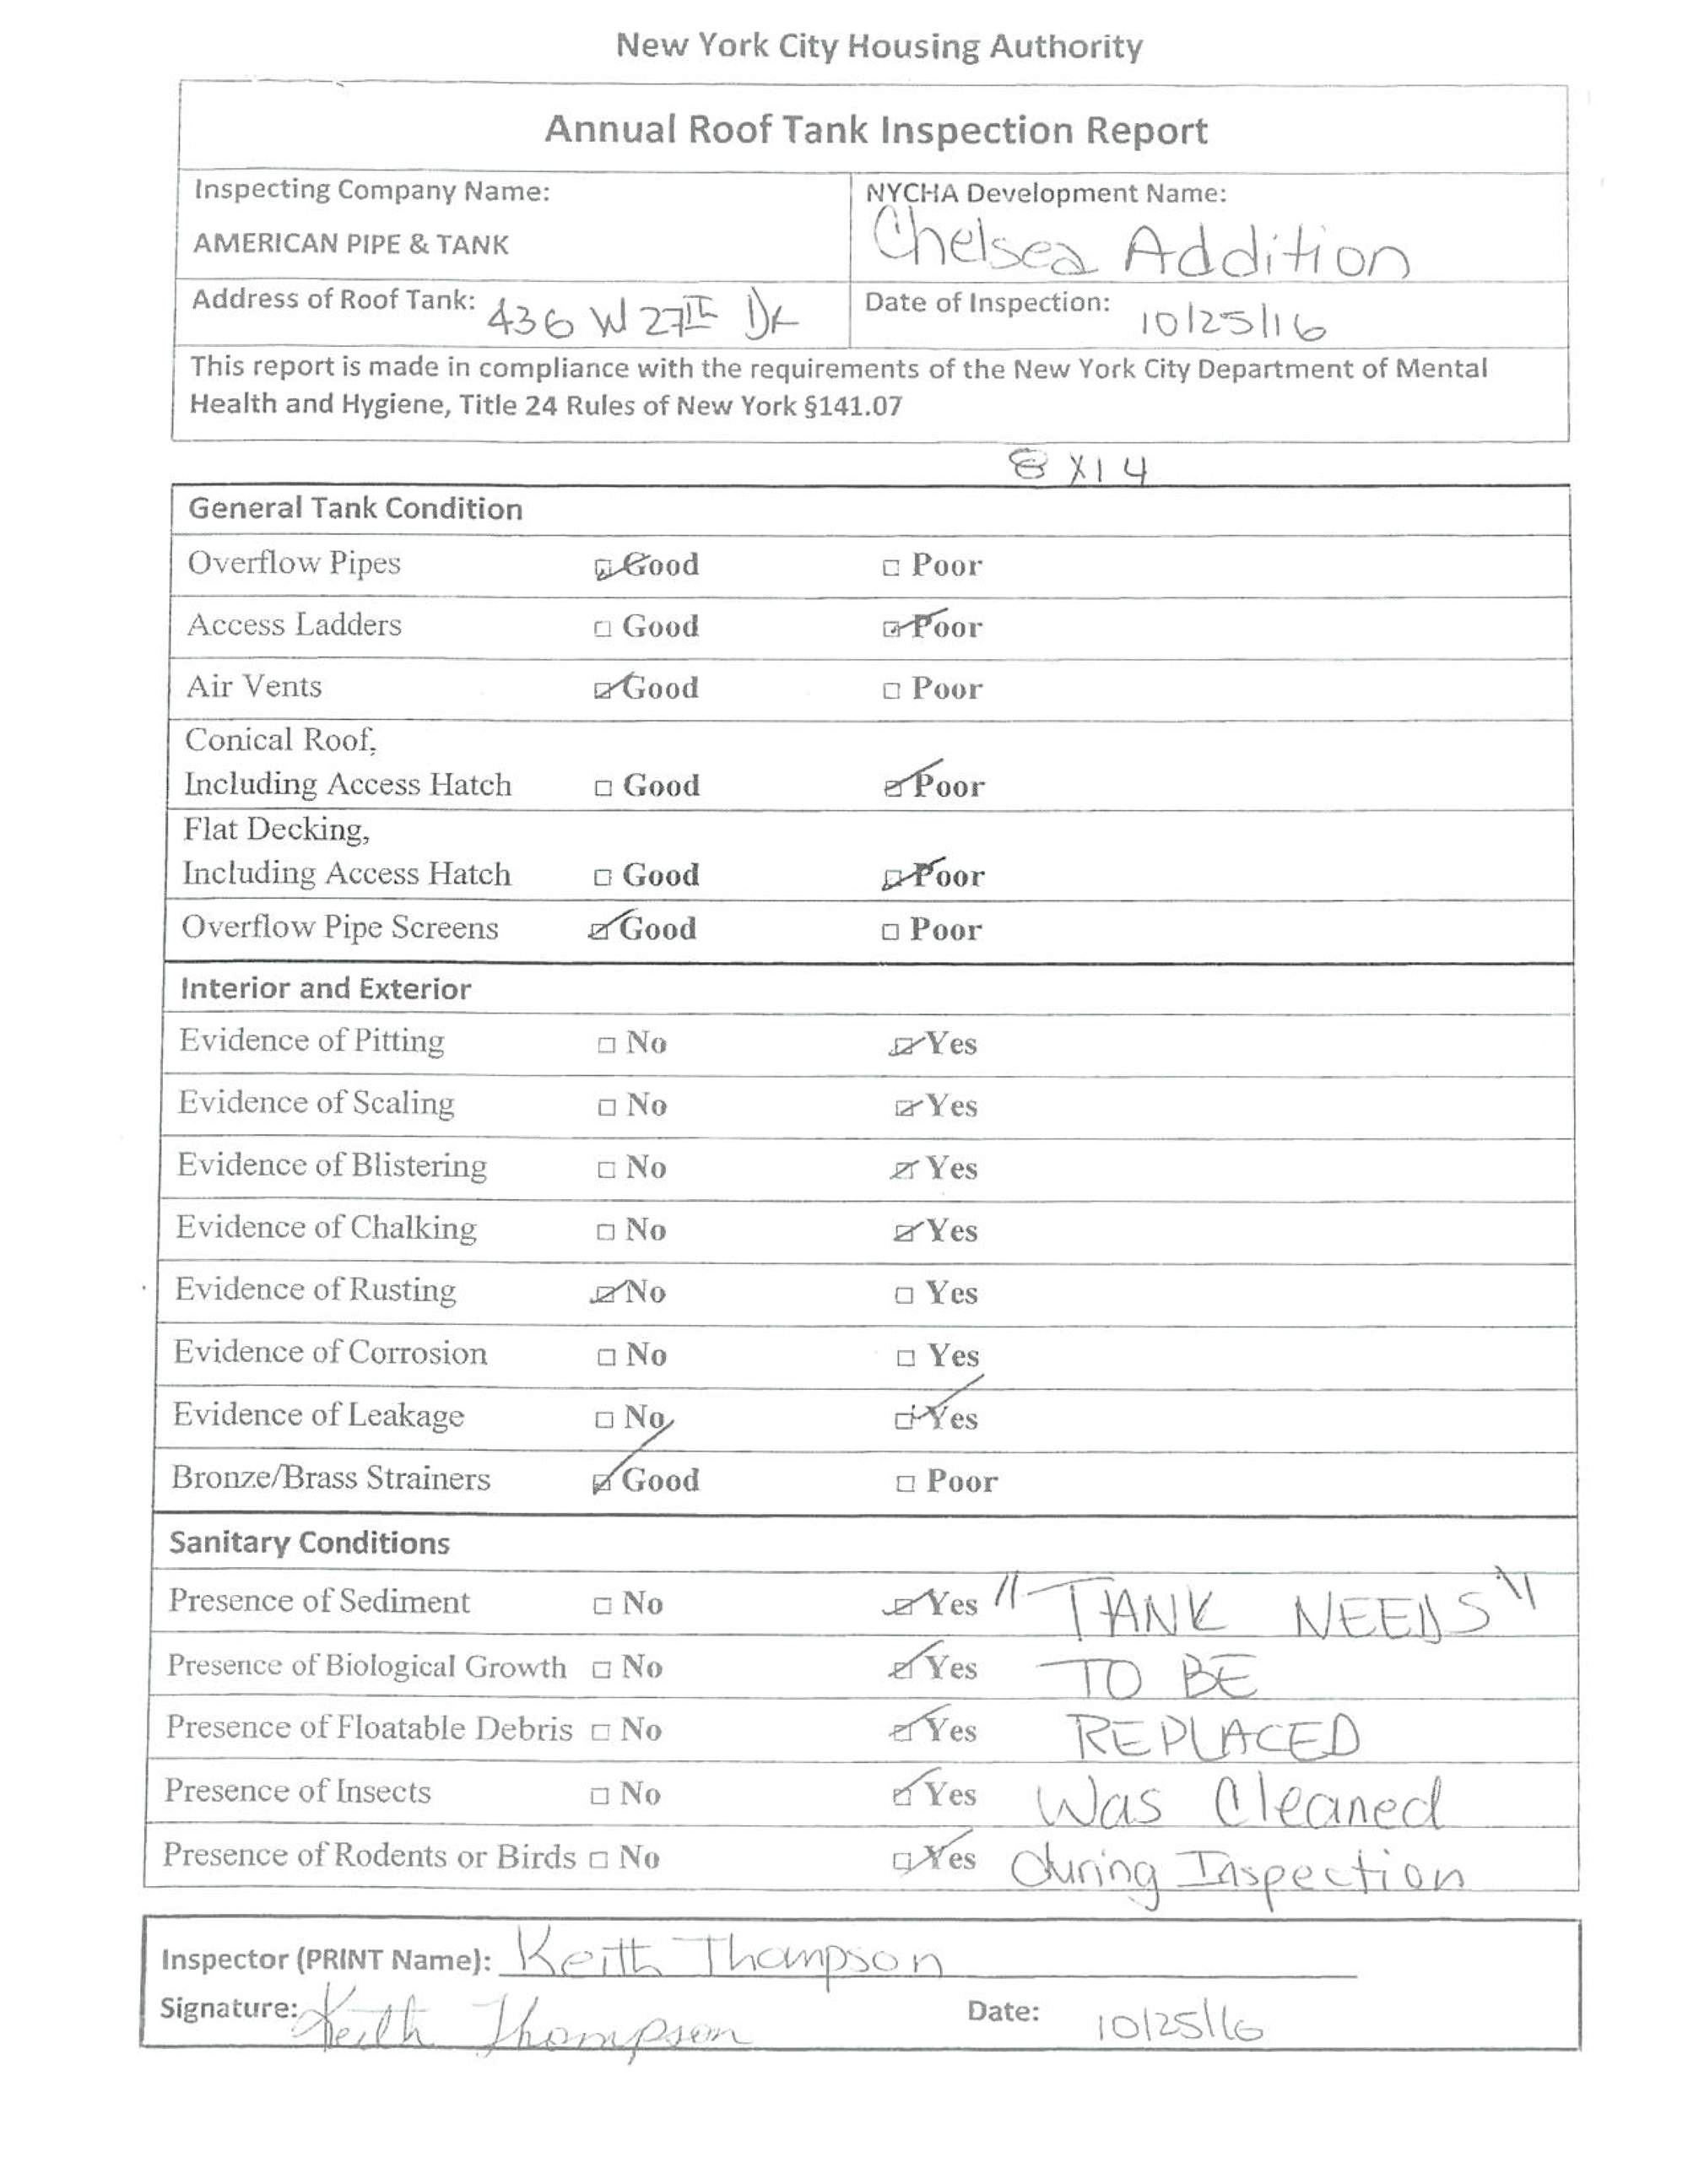 New York City Water tank inspectors’ notes detail two consecutive years of contamination in a drinking water tank supplying an elderly-only NYCHA building in Manhattan’s Chelsea neighborhood.